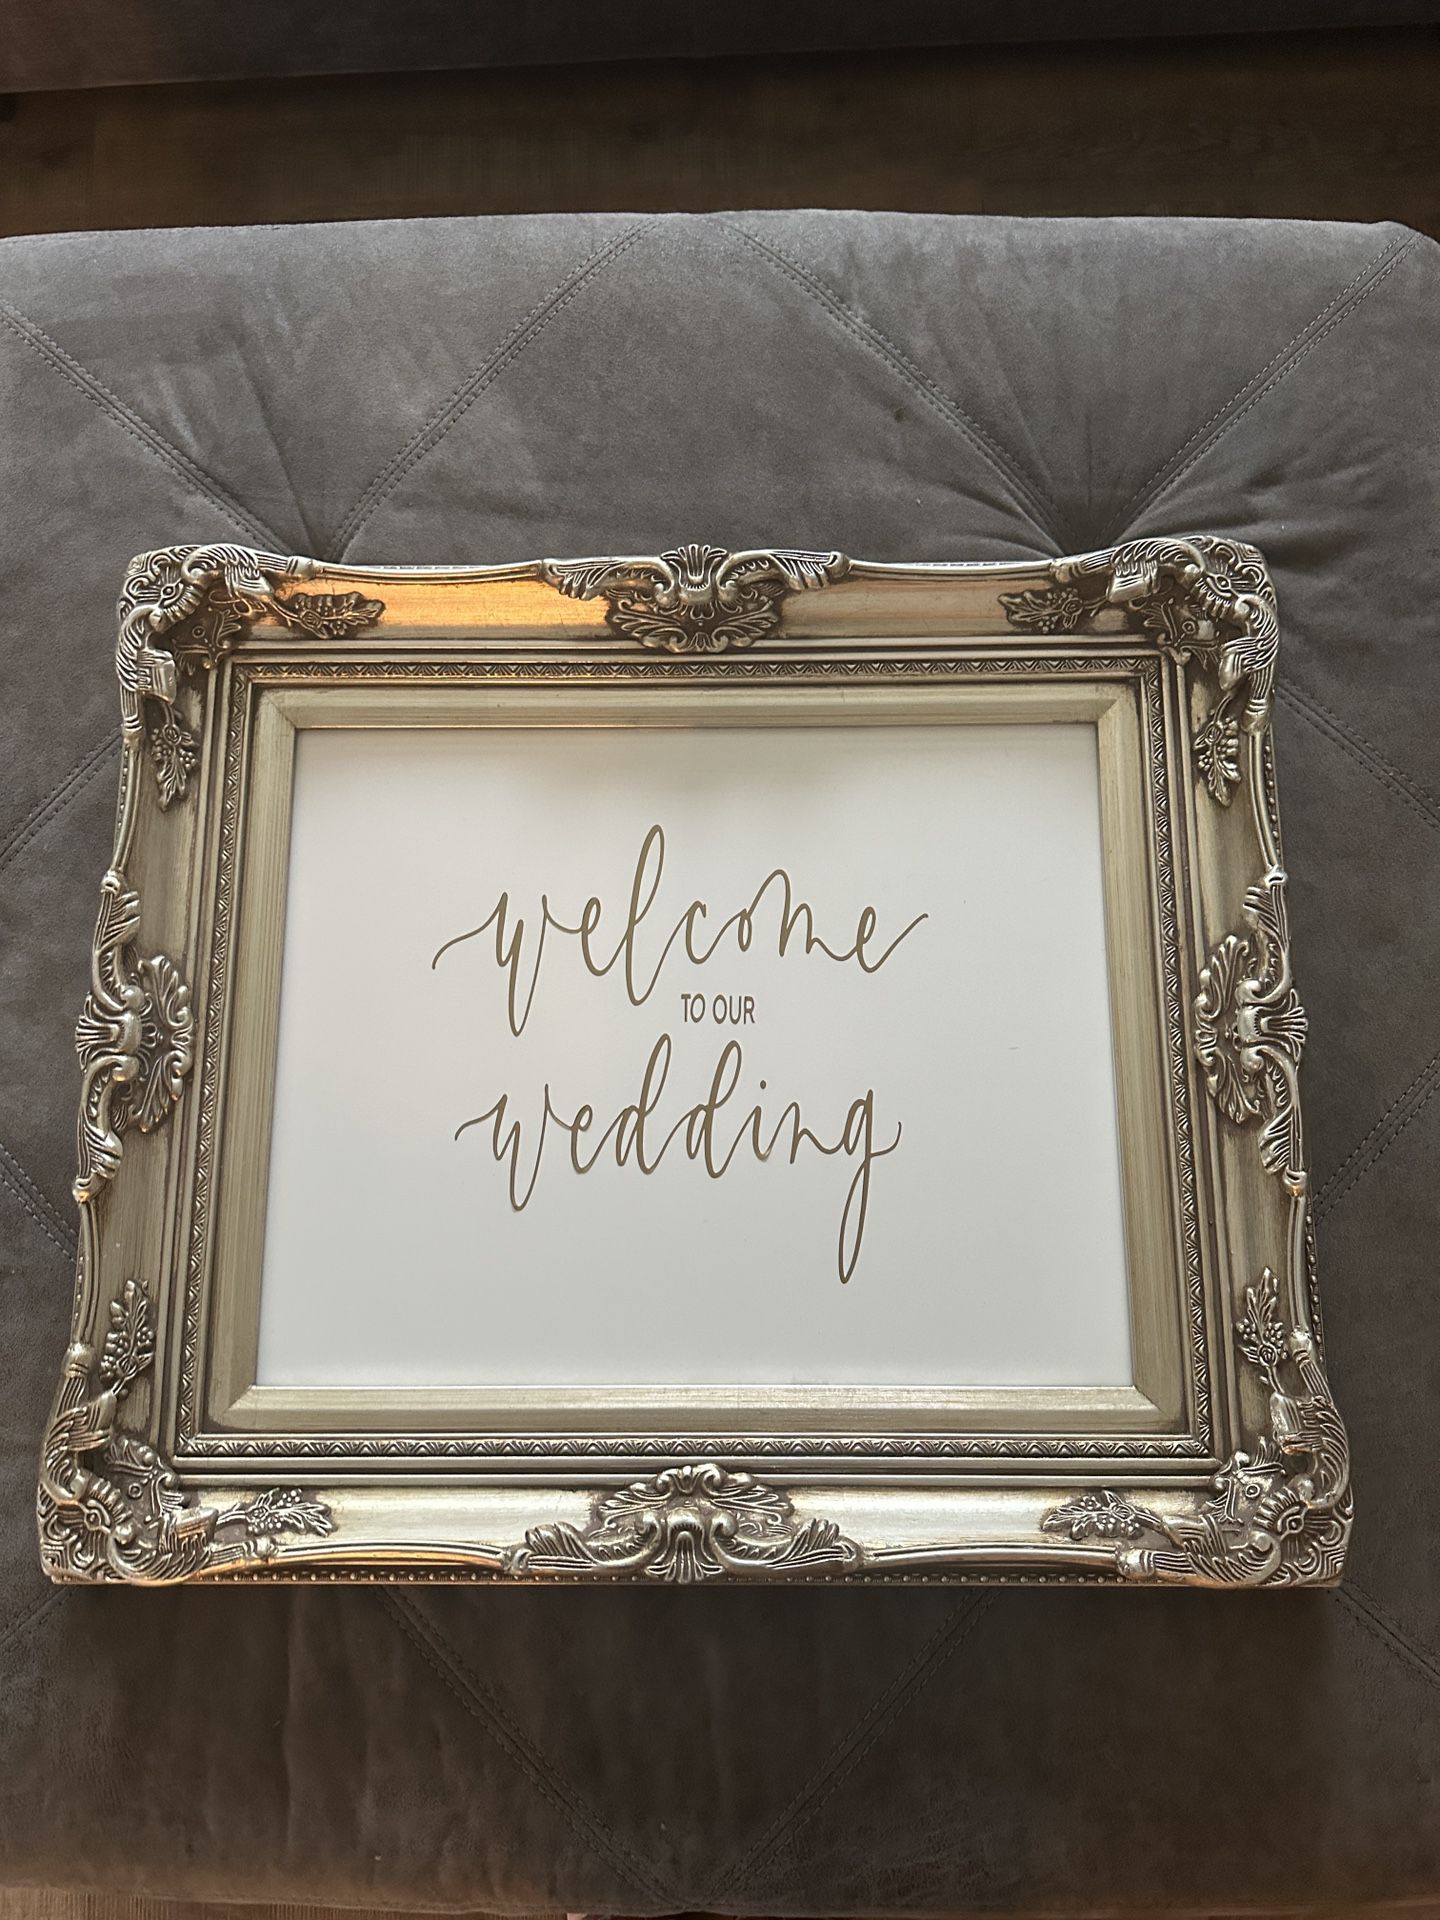 Welcome To Our Wedding Sign 